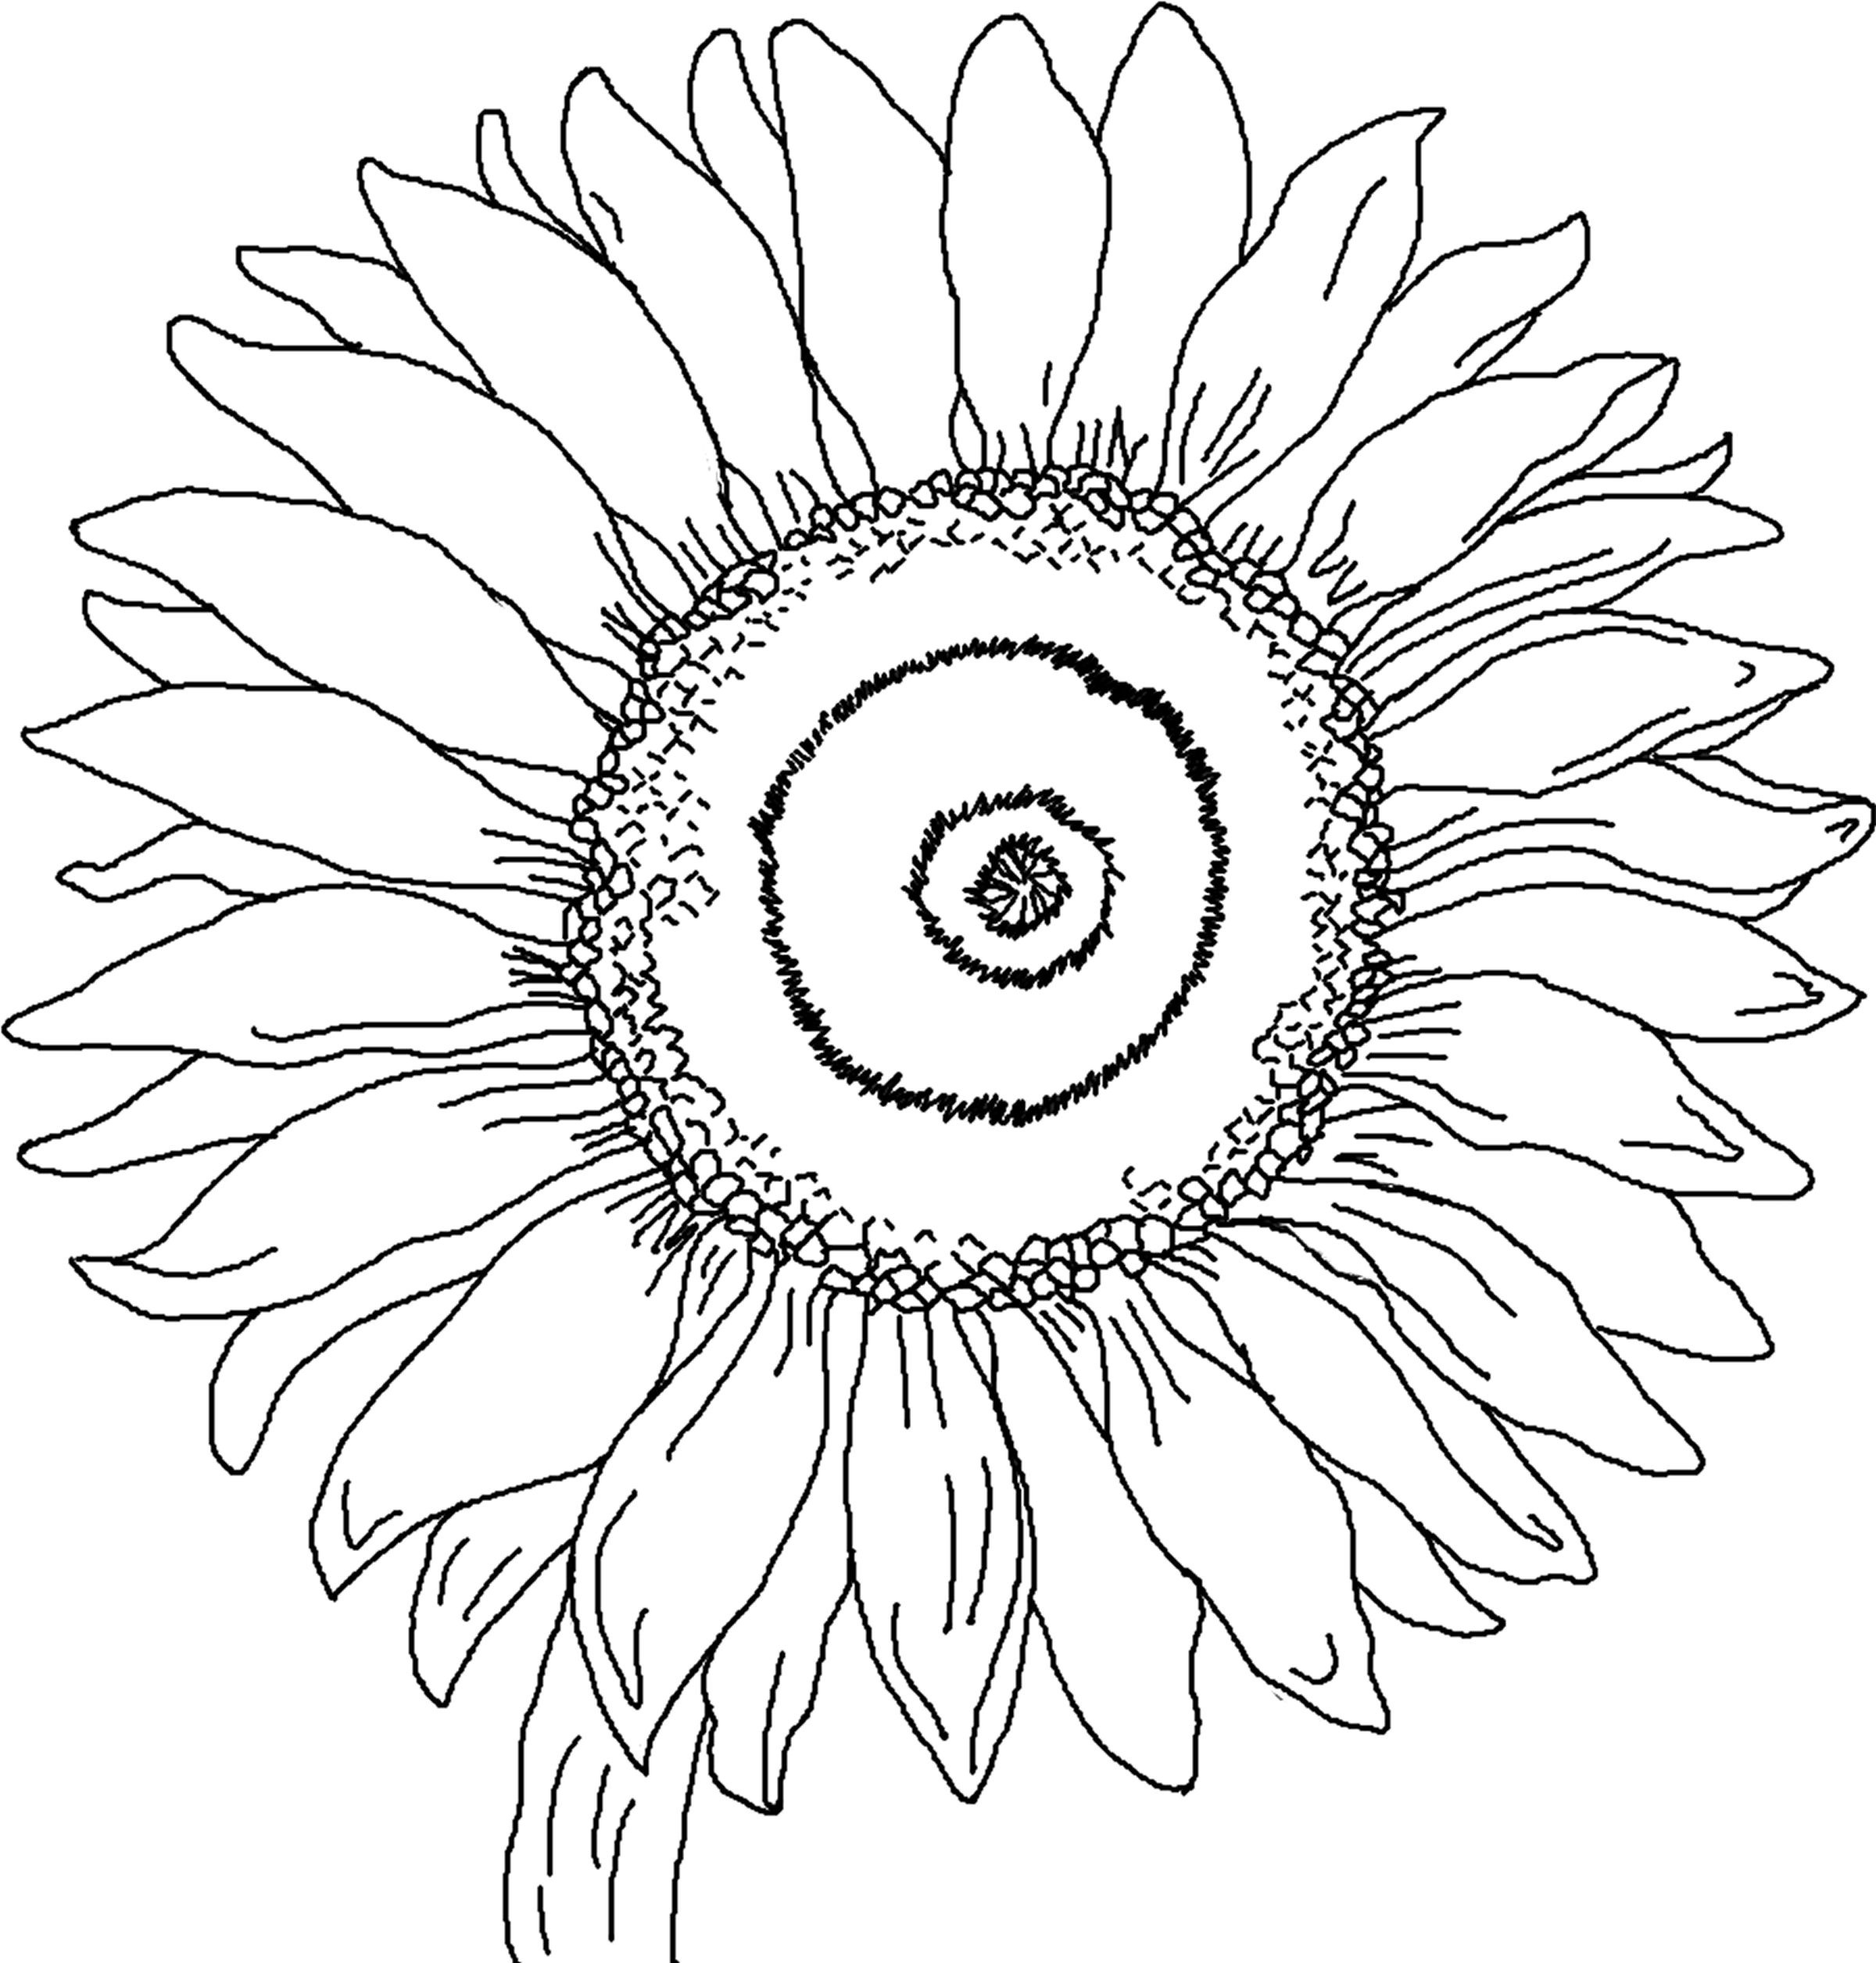 Sunflower coloring #9, Download drawings